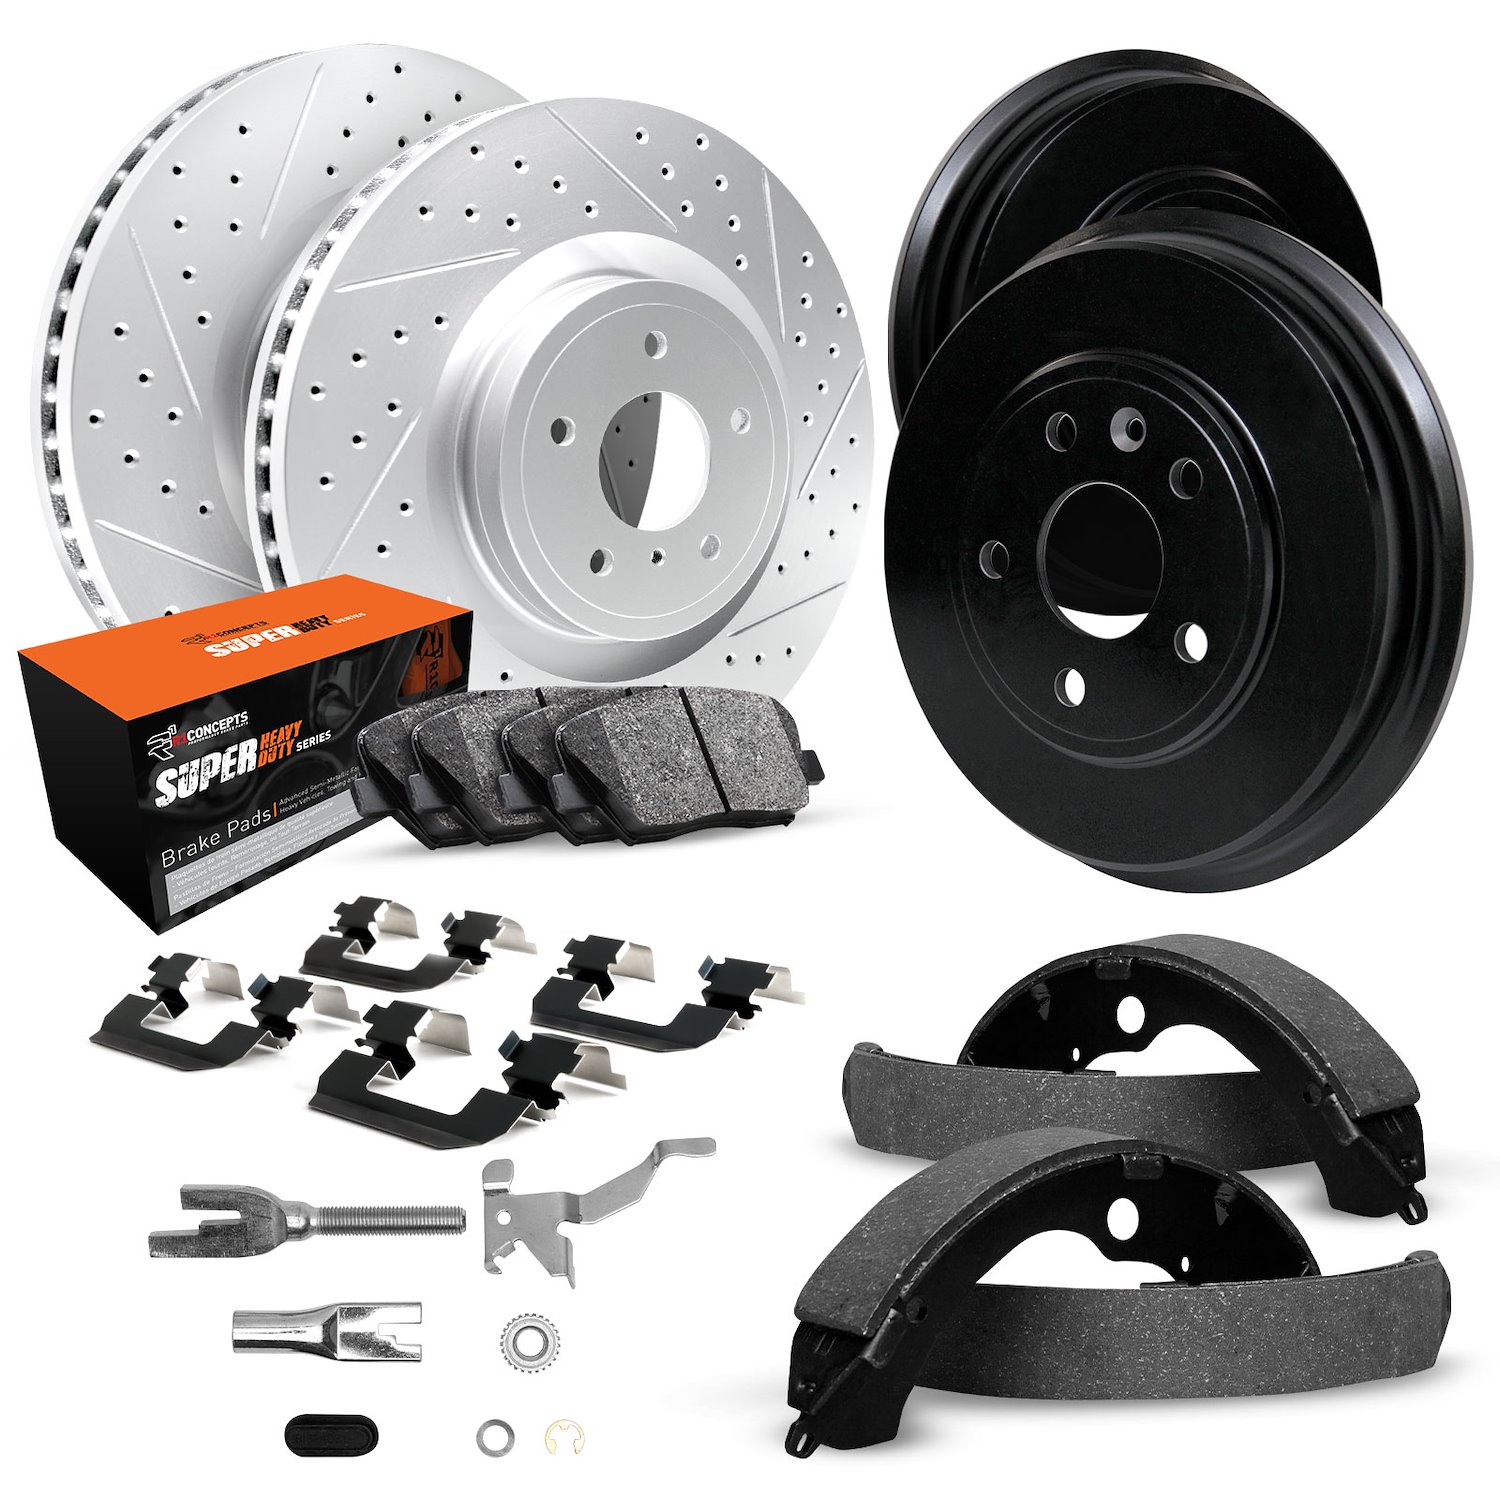 GEO-Carbon Drilled/Slotted Rotors/Drums w/Super-Duty Pads/Shoes/Hardware/Adjusters, 1972-1977 GM, Position: Front/Rear